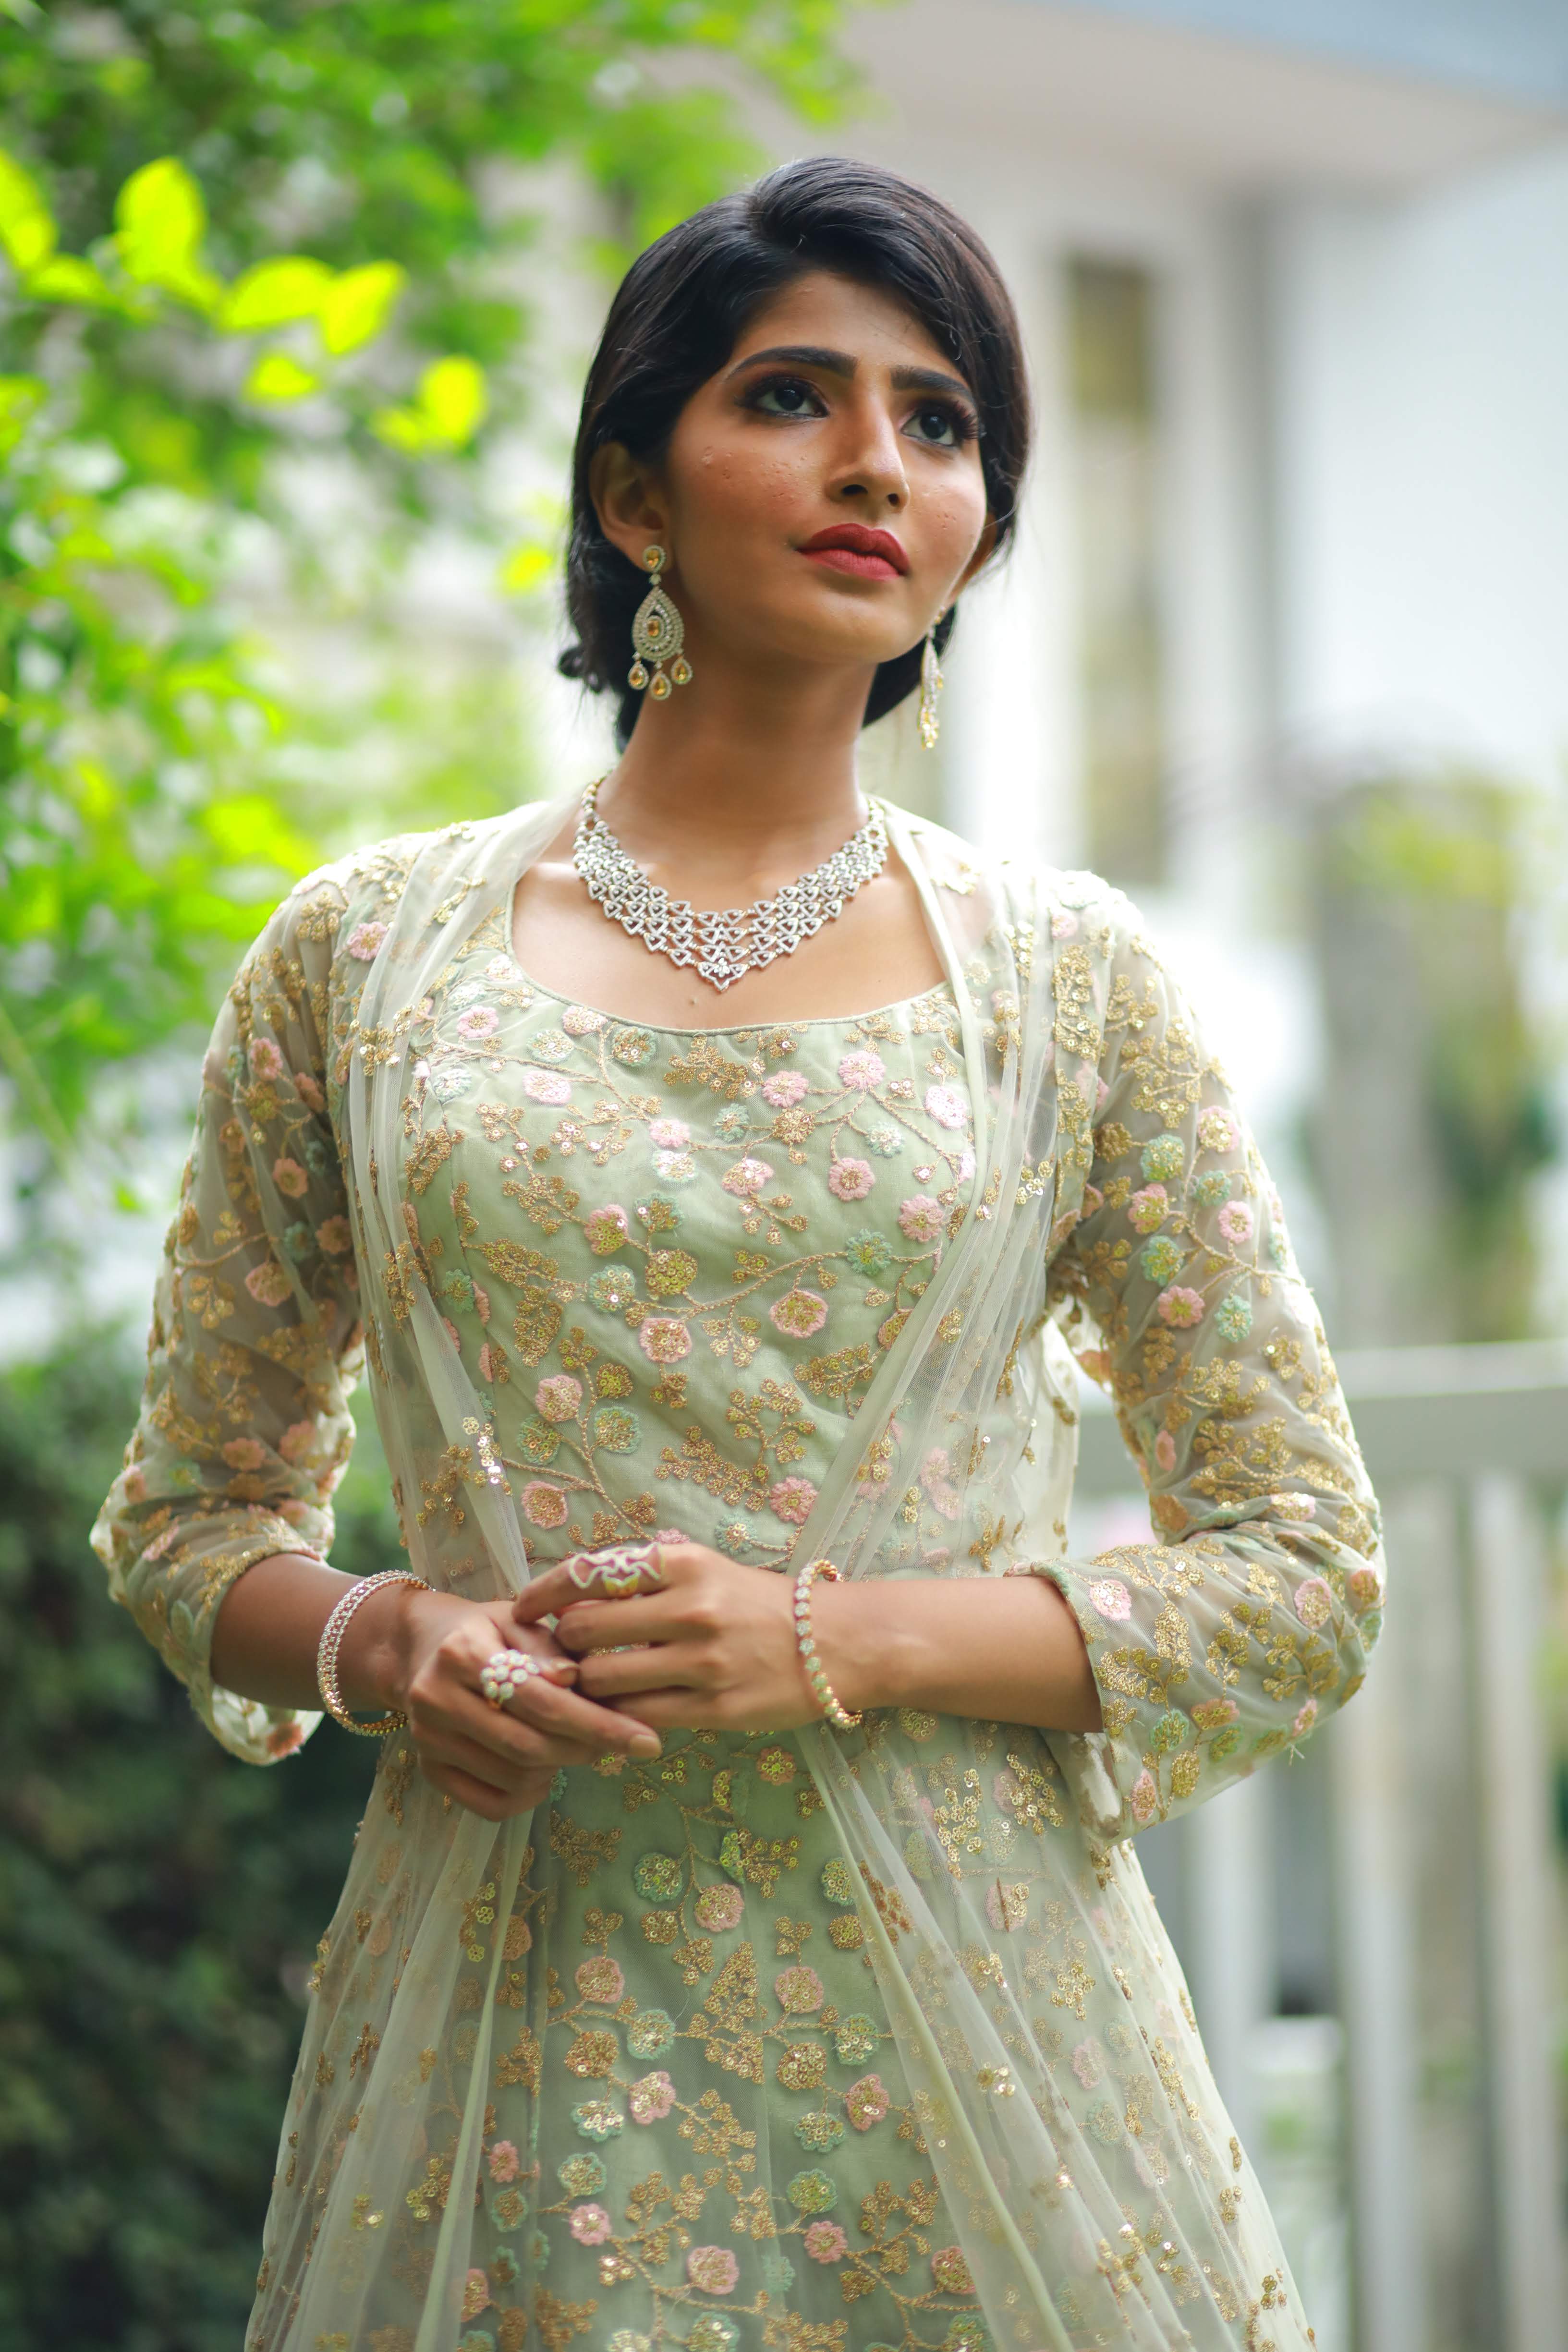 Dezire Bridals Vyttila Tailors For Women Wedding Gown In Ernakulam Justdial